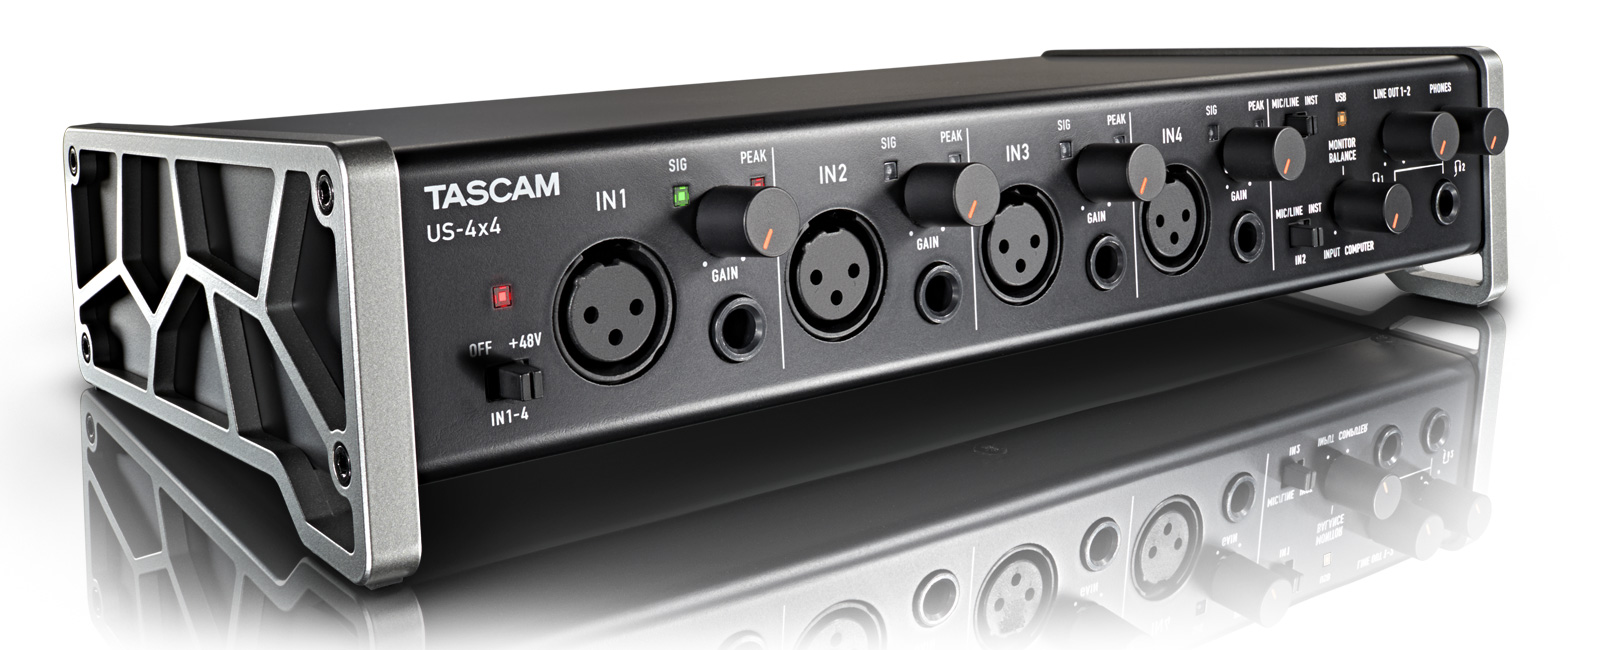 US-4x4 | SPECIFICATIONS | TASCAM - United States